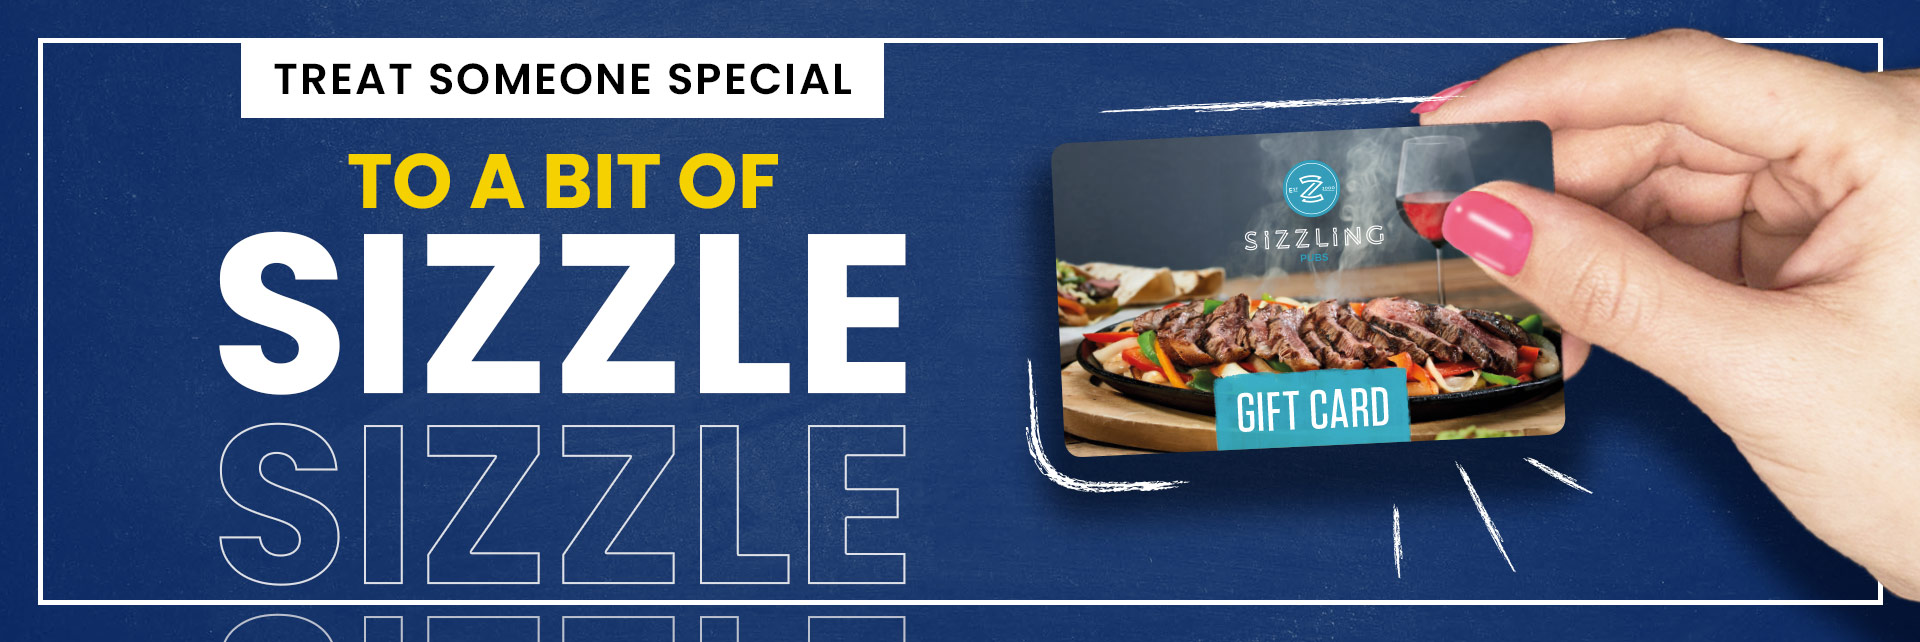 Sizzling Pubs Gift Card at The Riftswood in Tamworth